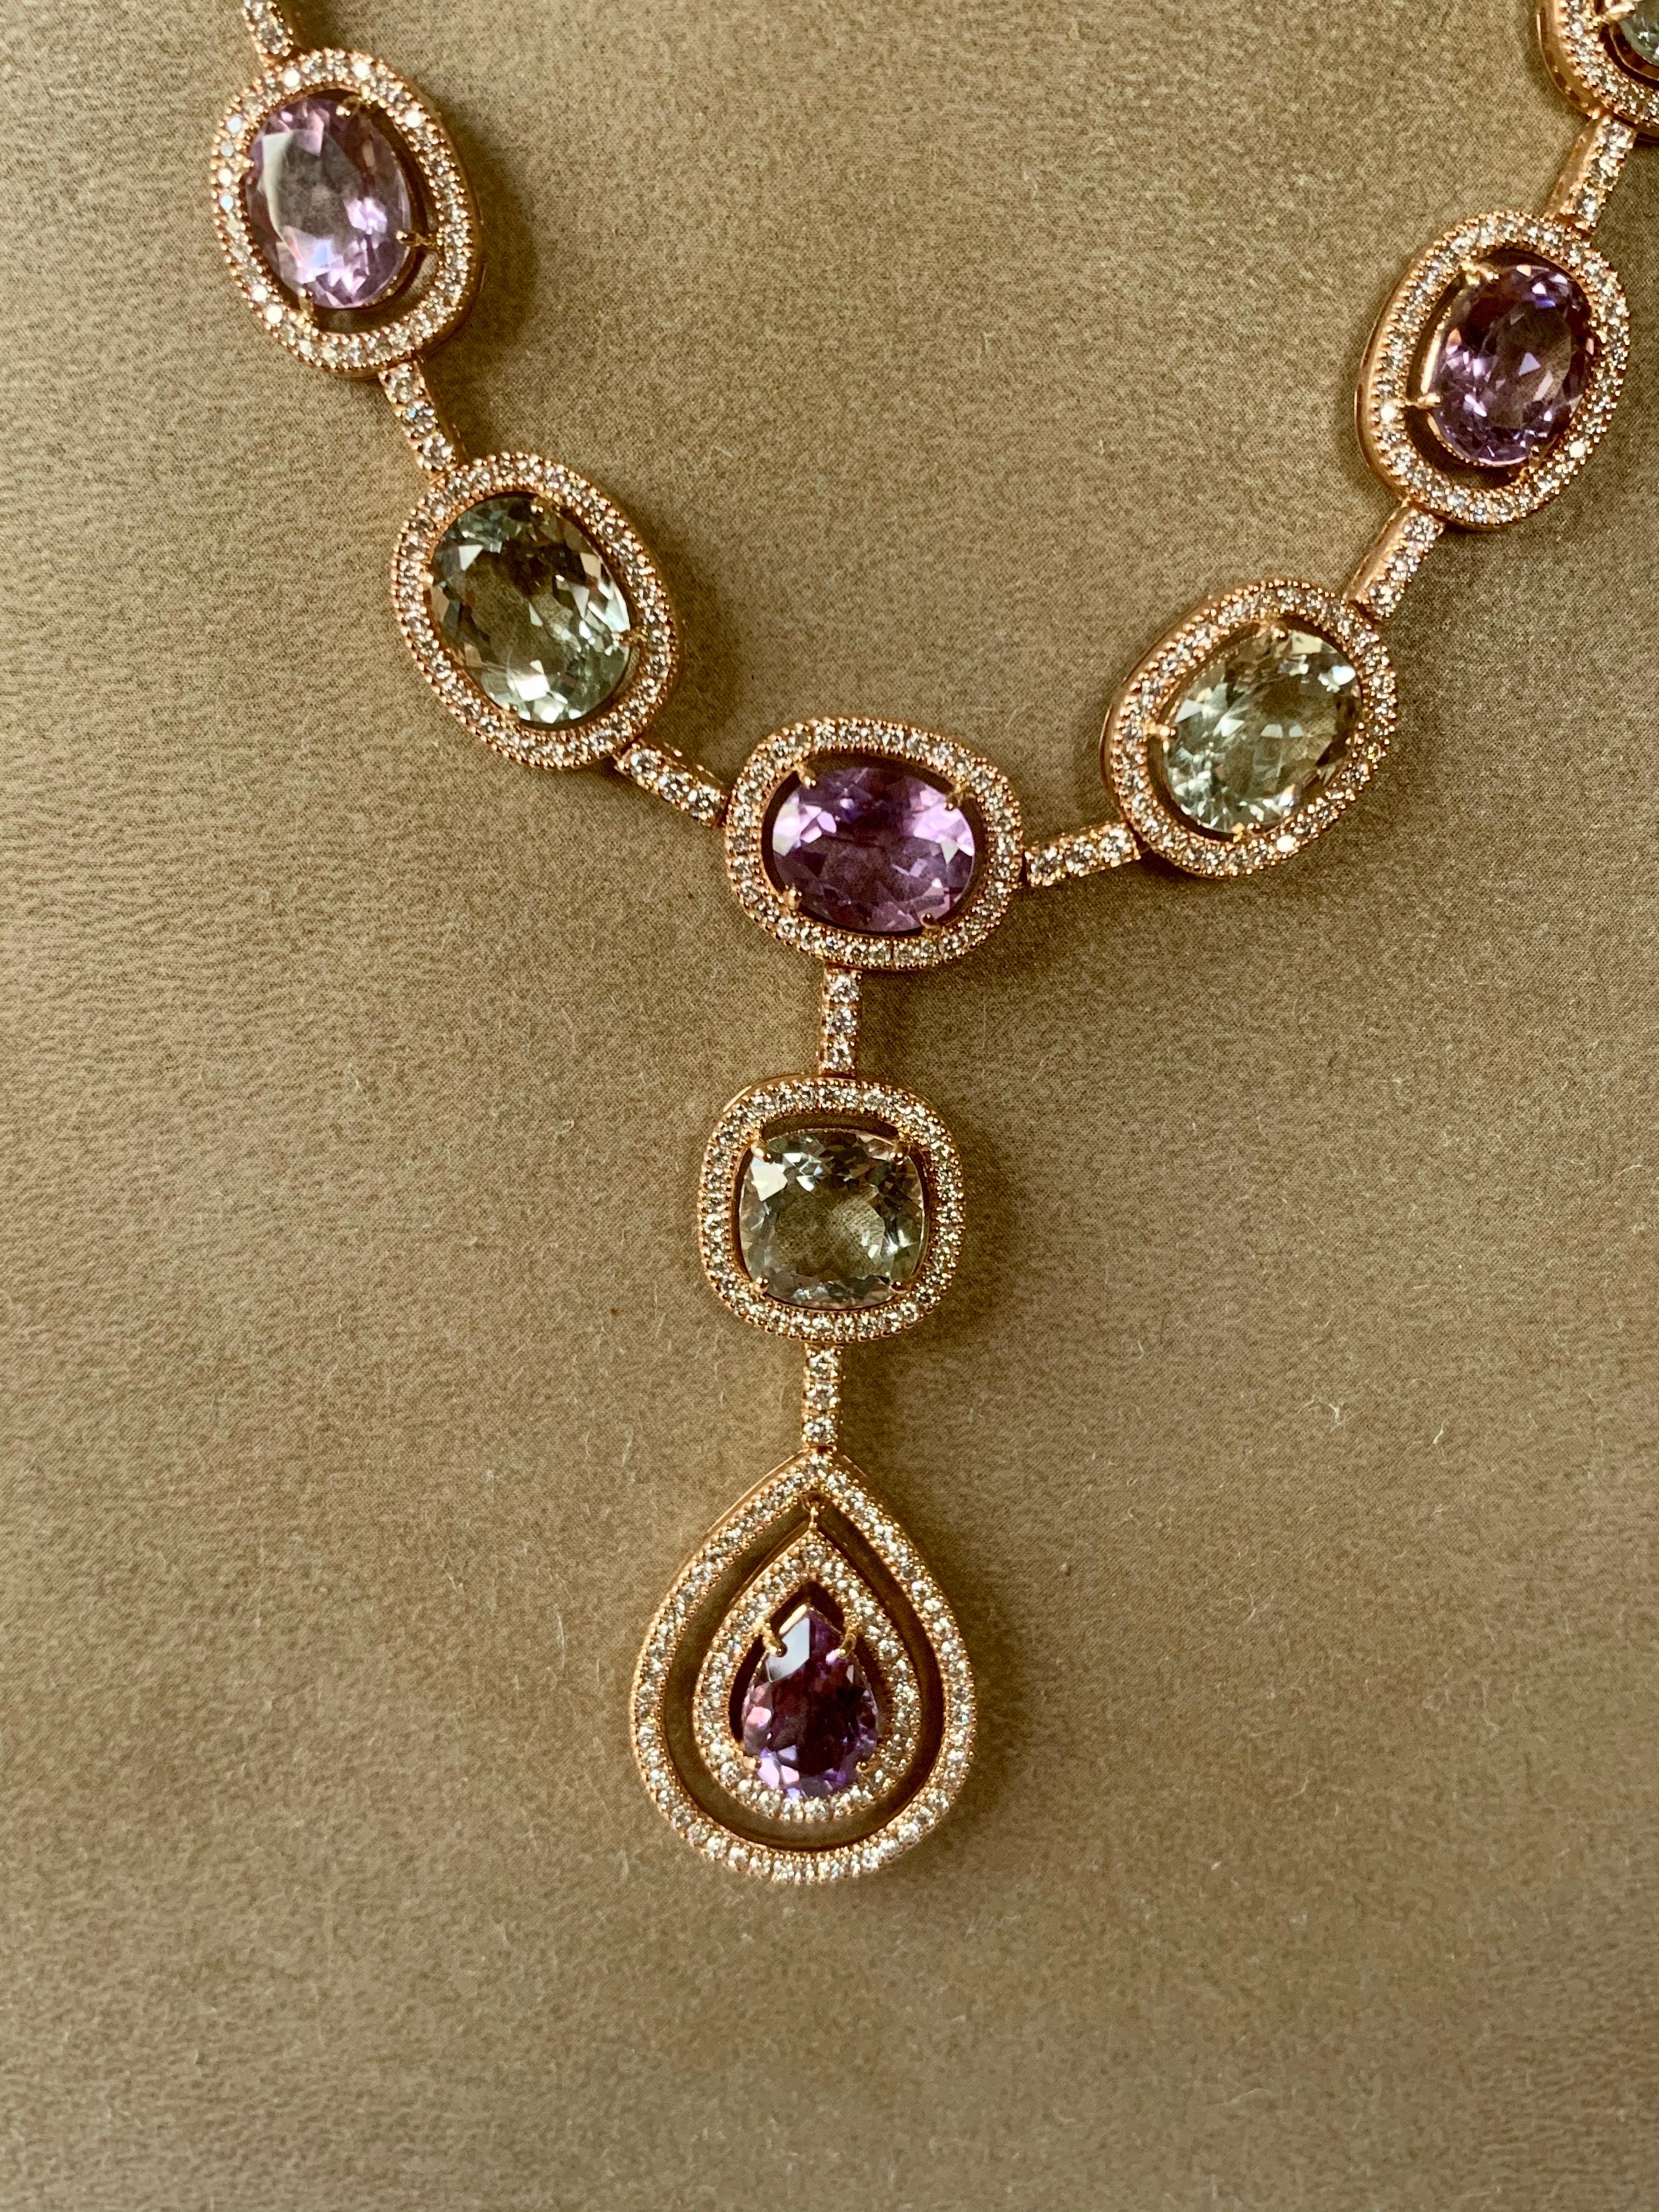 This playful yet romantic Diamond and (green) Amethyst necklace was inspired  in a Y necklace design and crafted in 18 K pink Gold. Set with 5 green Amethysts weighing 13.99 ct, 6 Amethysts weighing 13.05 ct and decorated with 443 brilliant cut